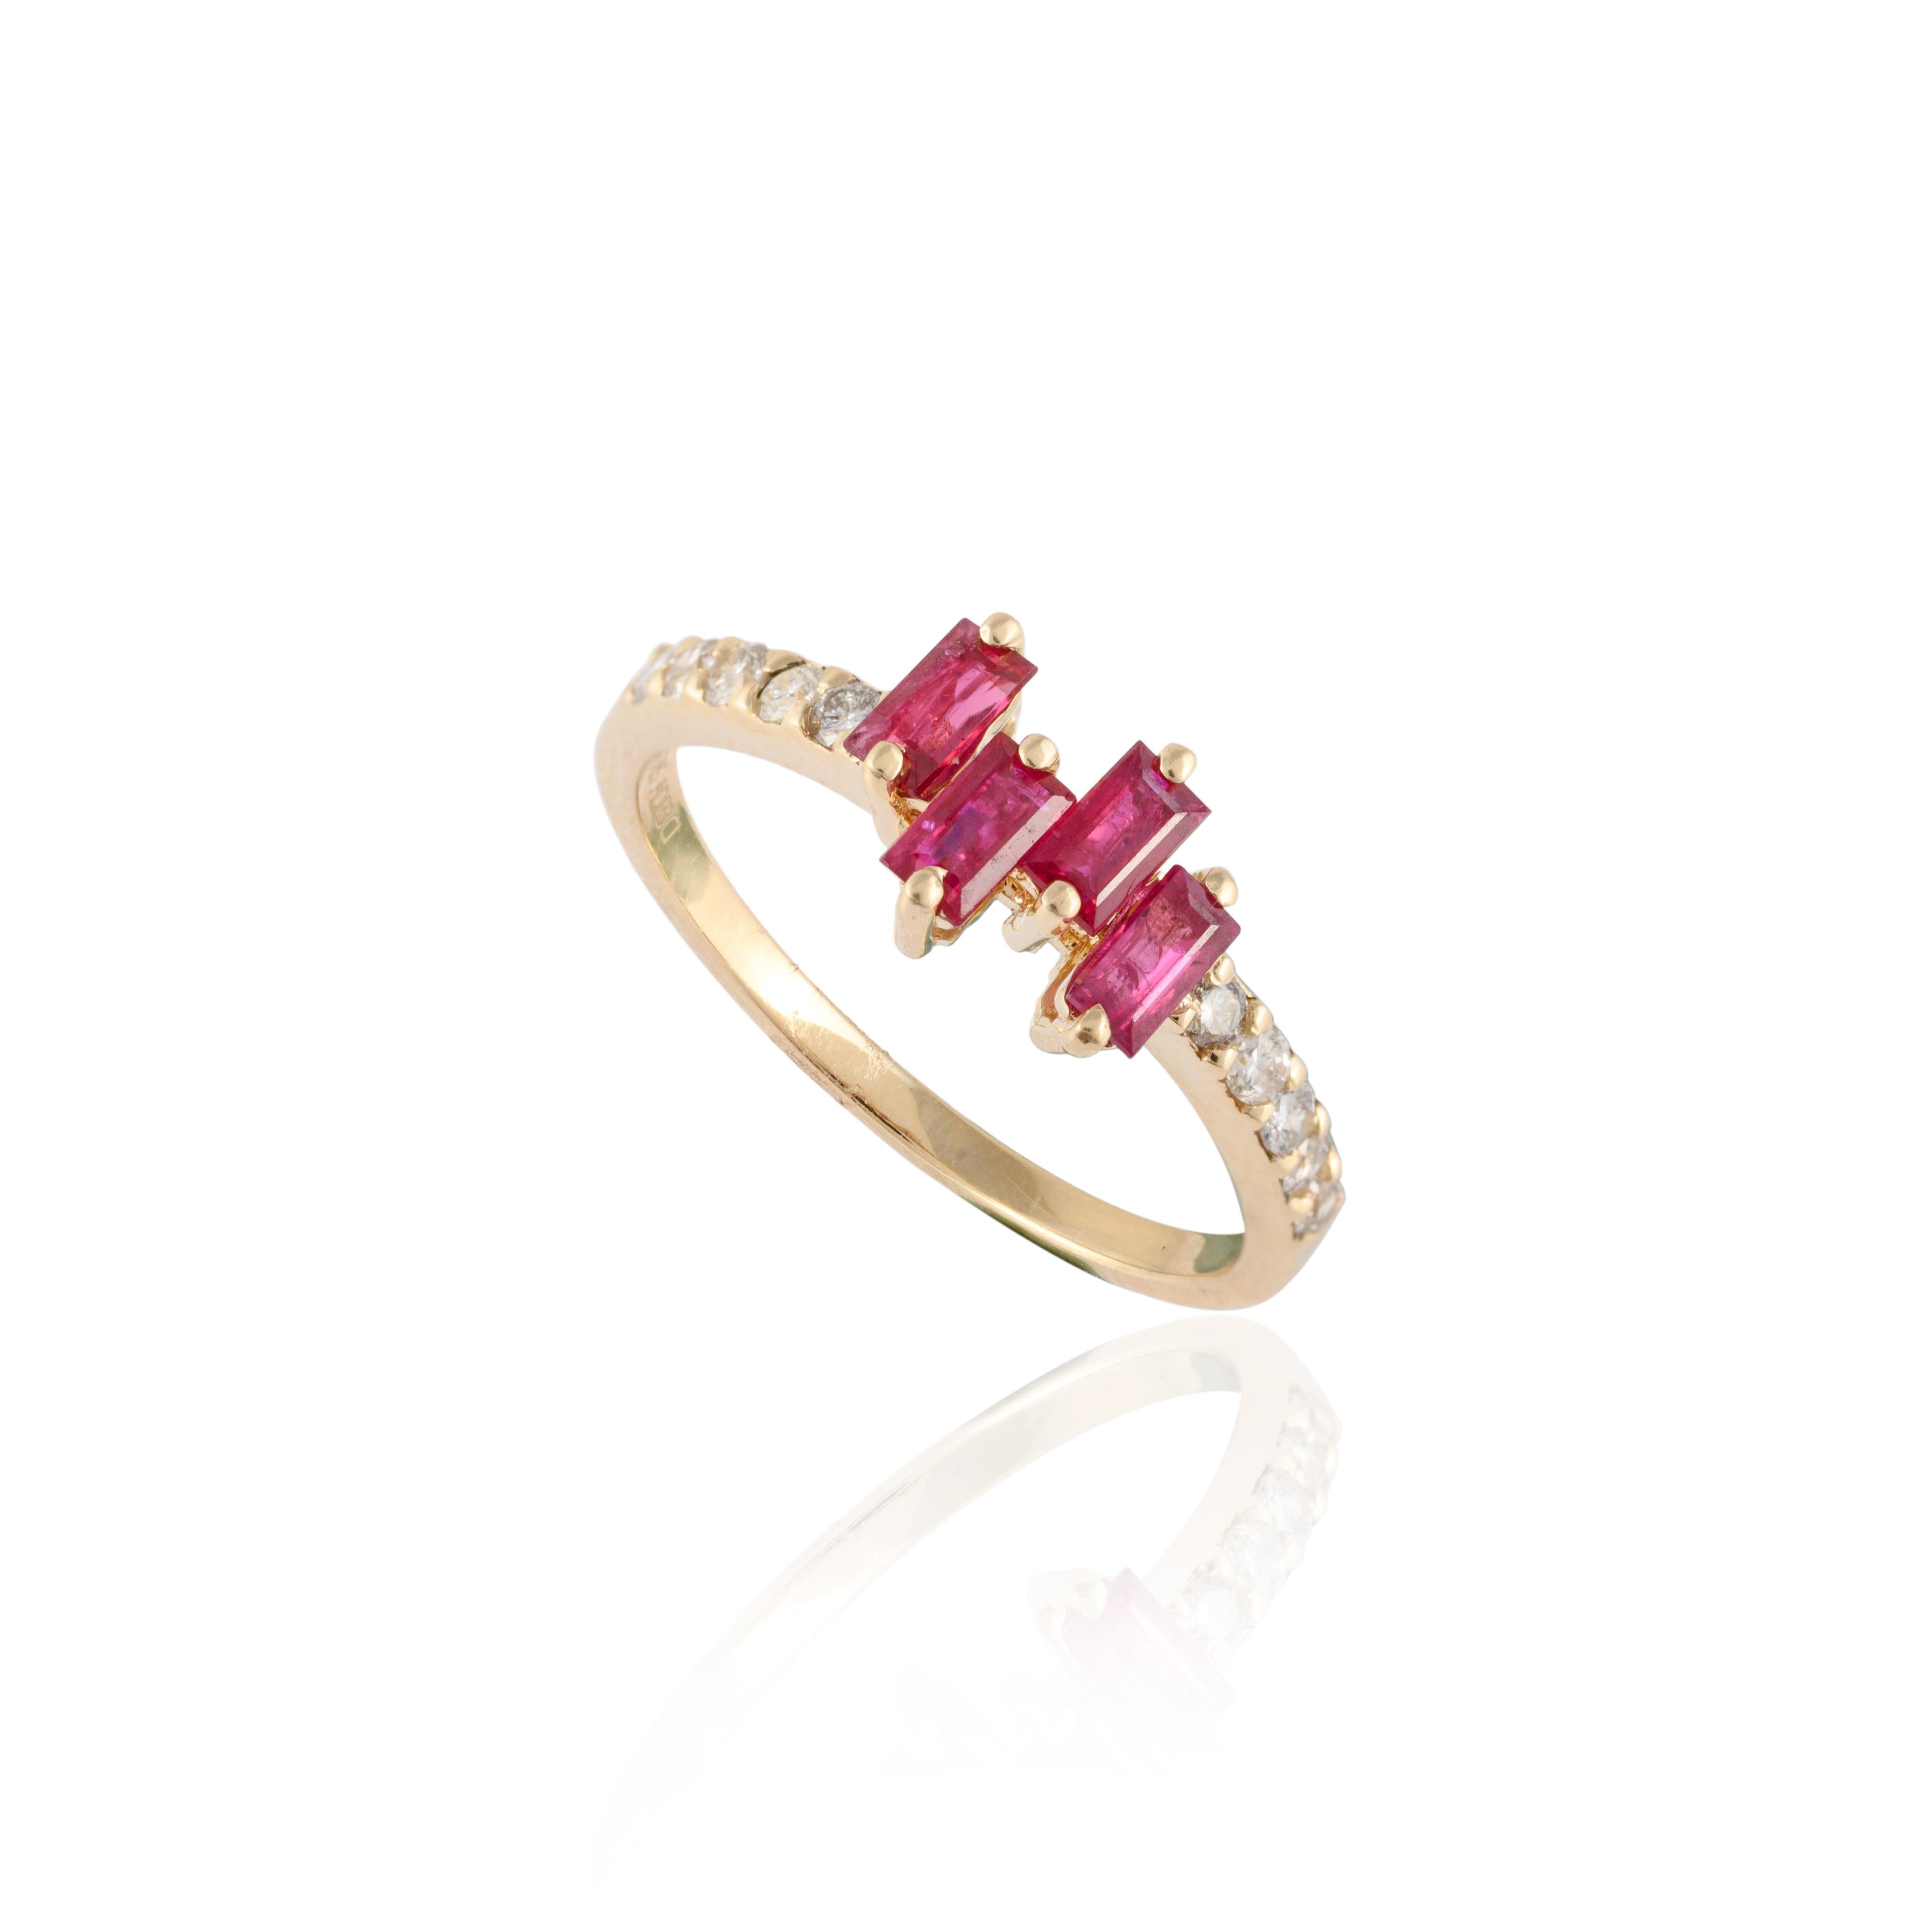 For Sale:  Baguette Ruby Diamond Ring Gift for Her in 14k Solid Yellow Gold 10